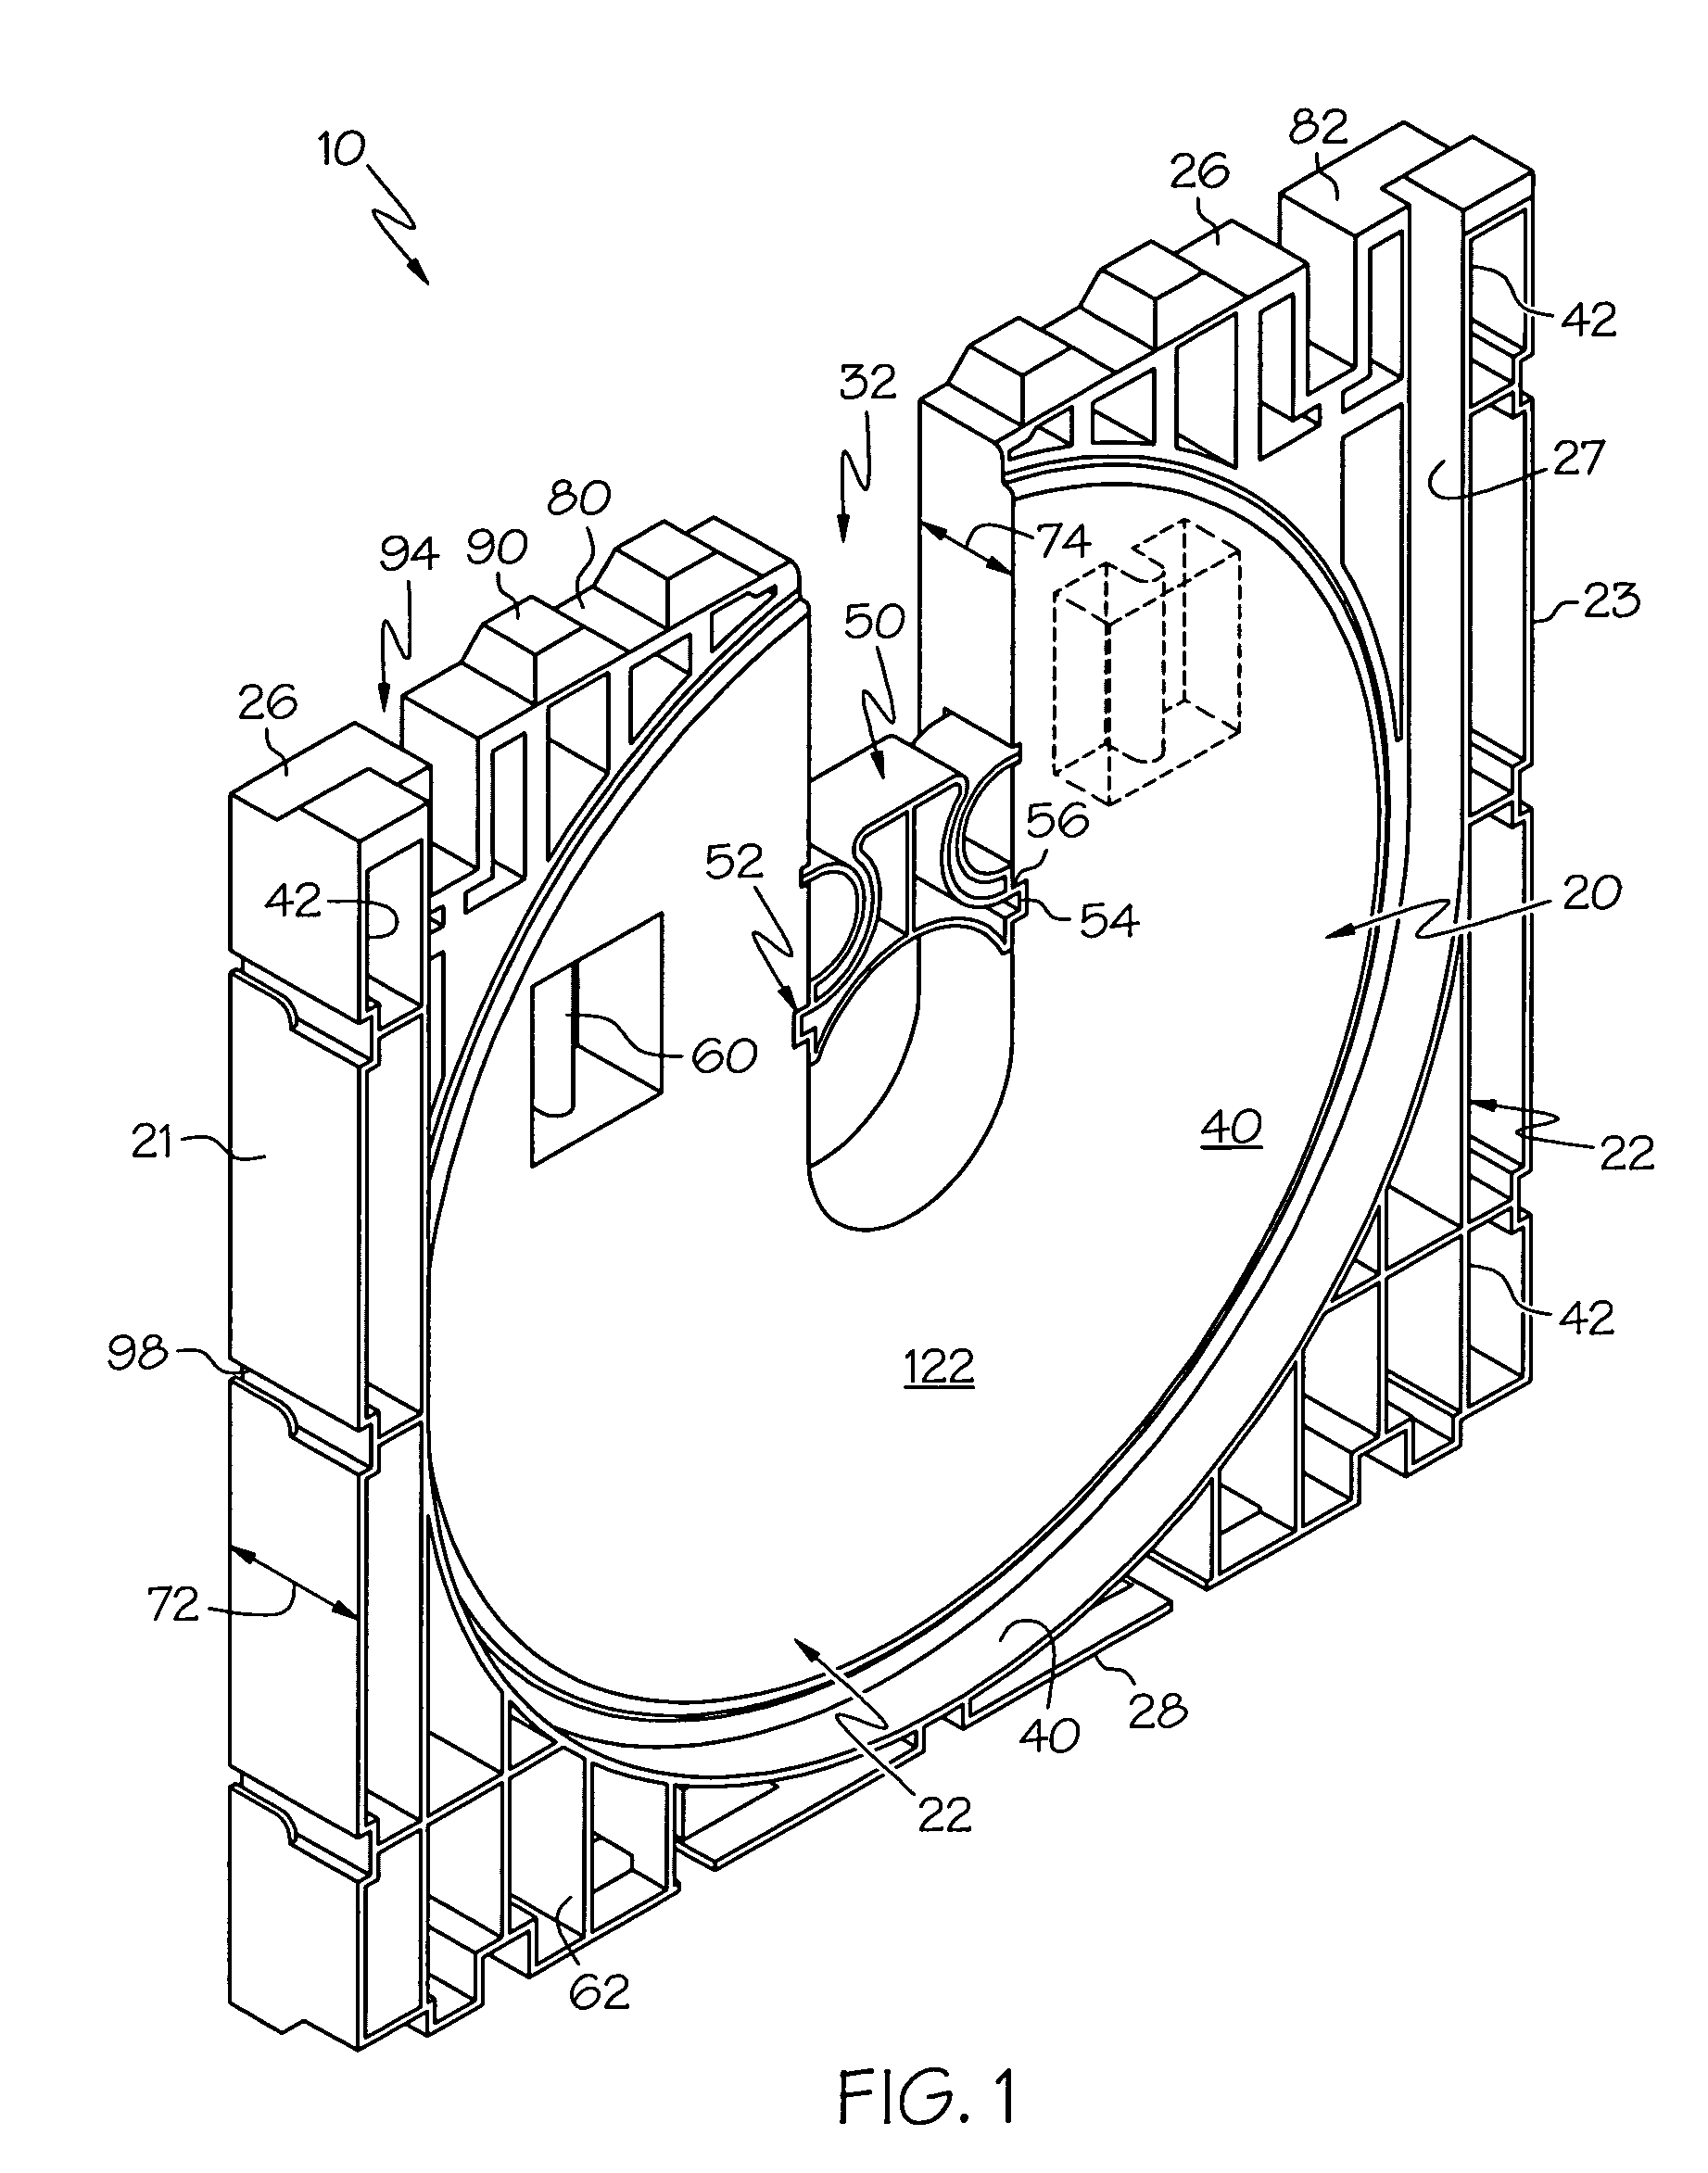 End-board for a core-wound roll product packaging system